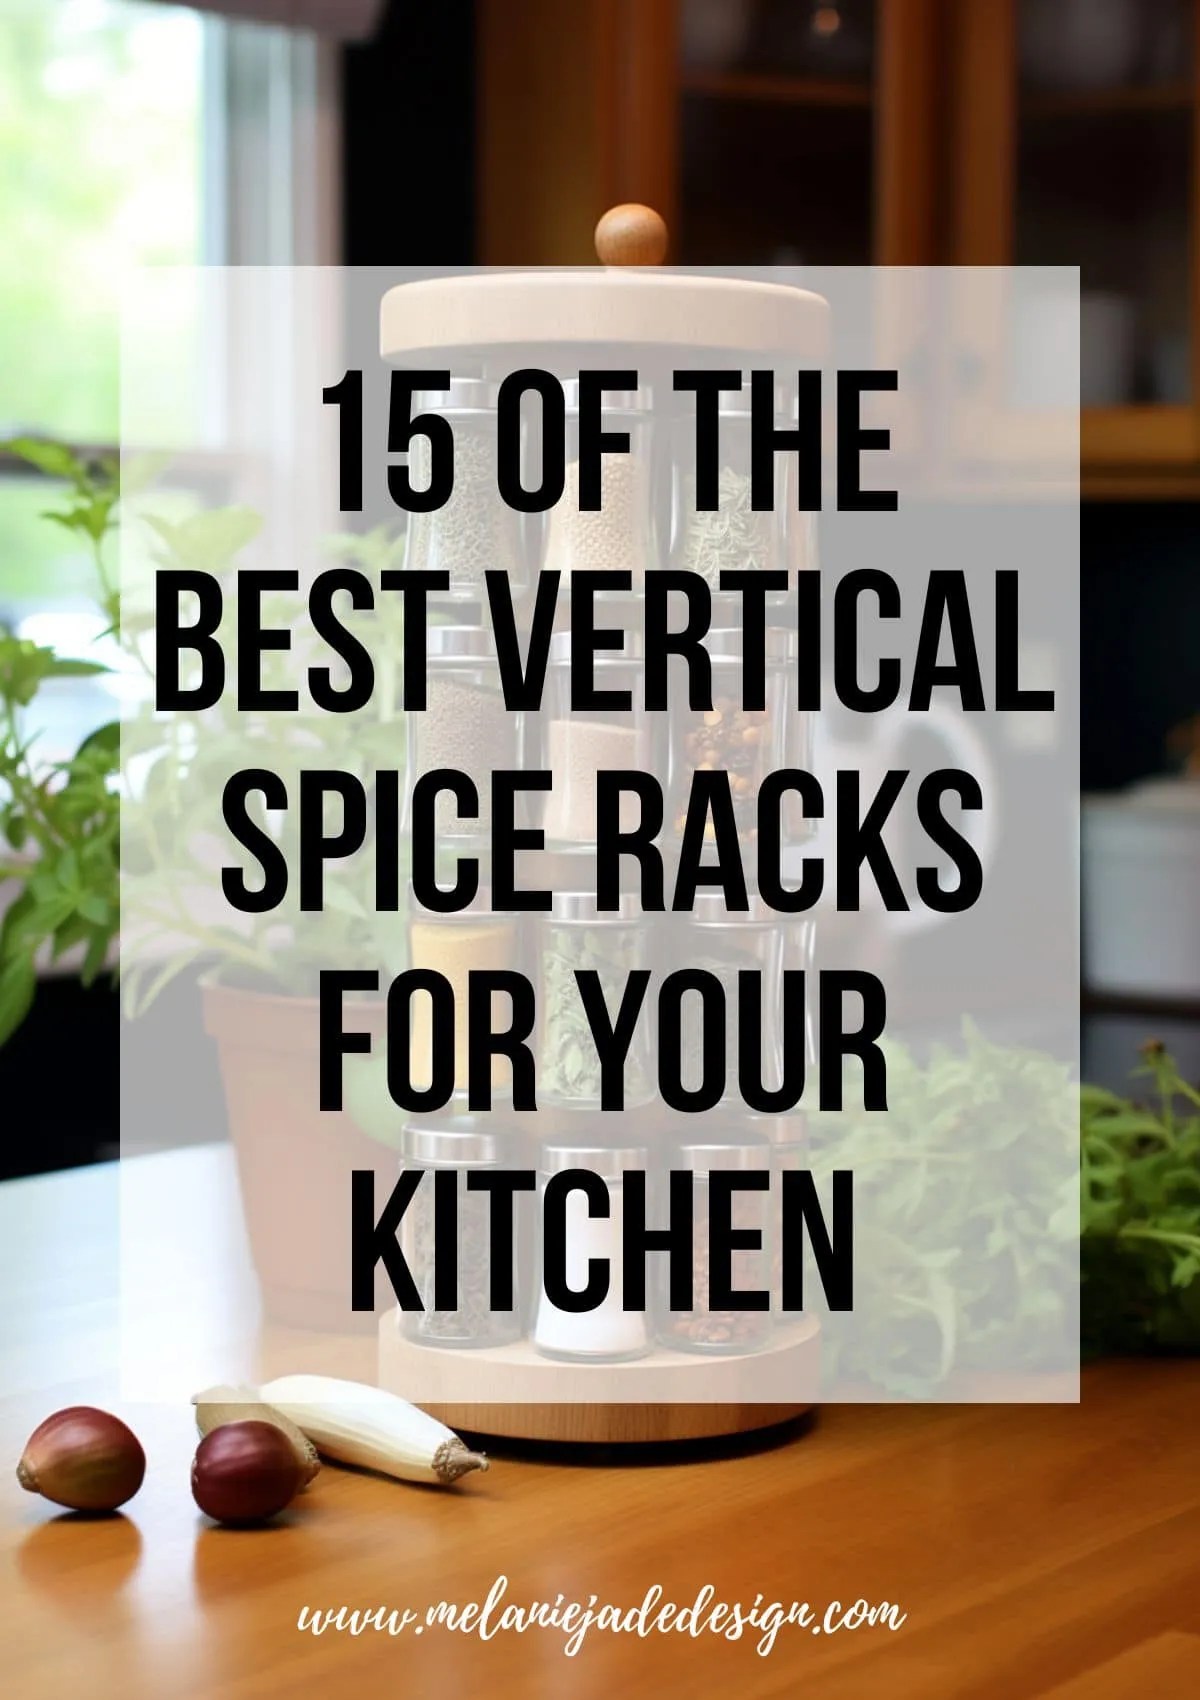 15 of the Best Vertical Spice Racks for Your Kitchen Pinterest pin